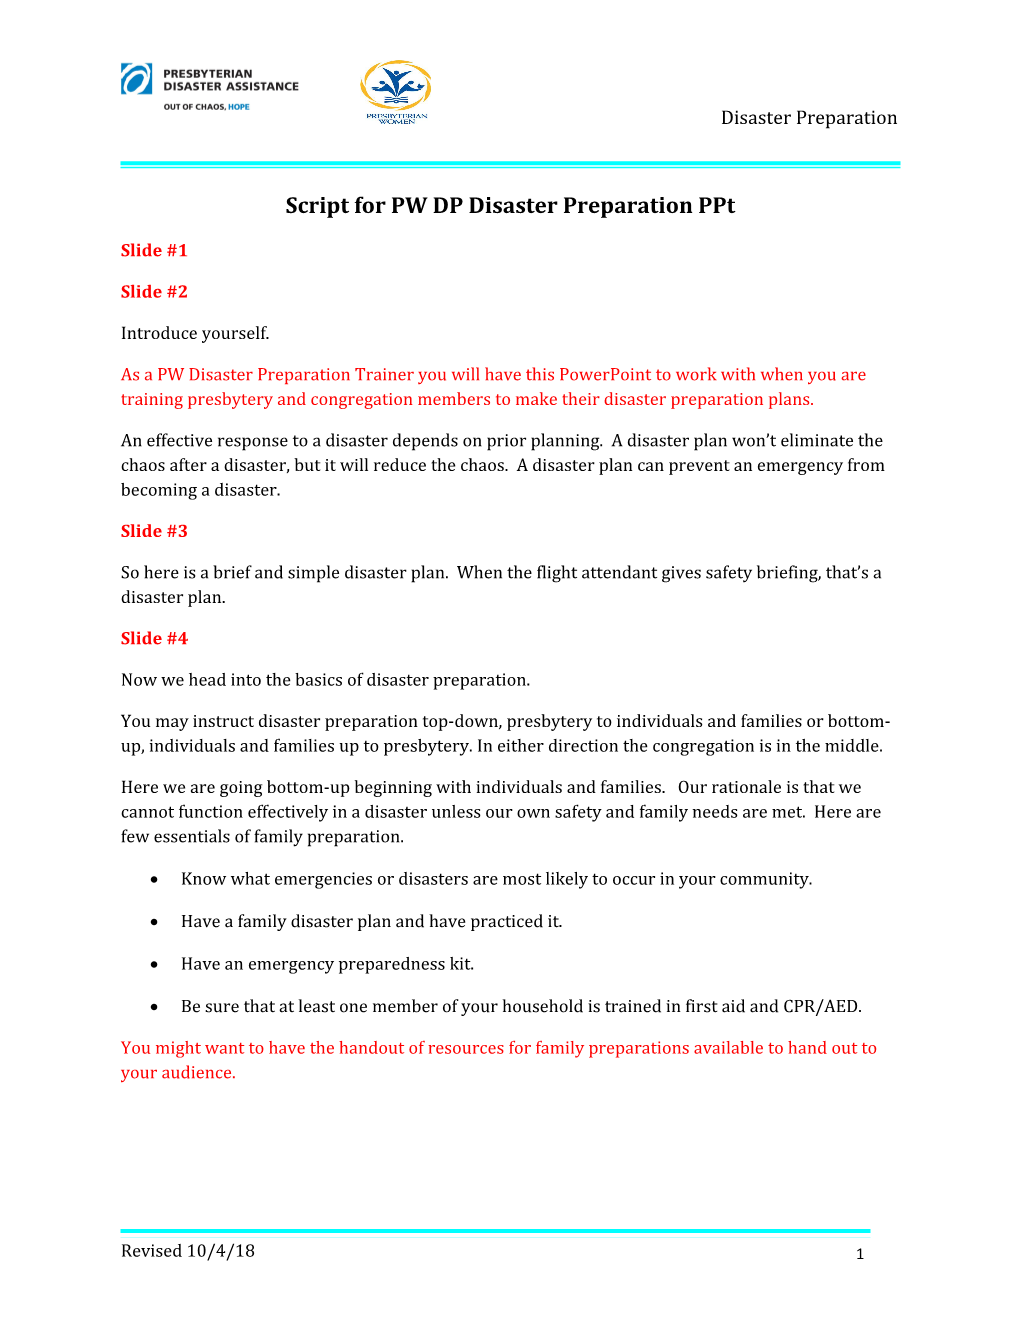 Script for PW DP Disaster Preparation Ppt